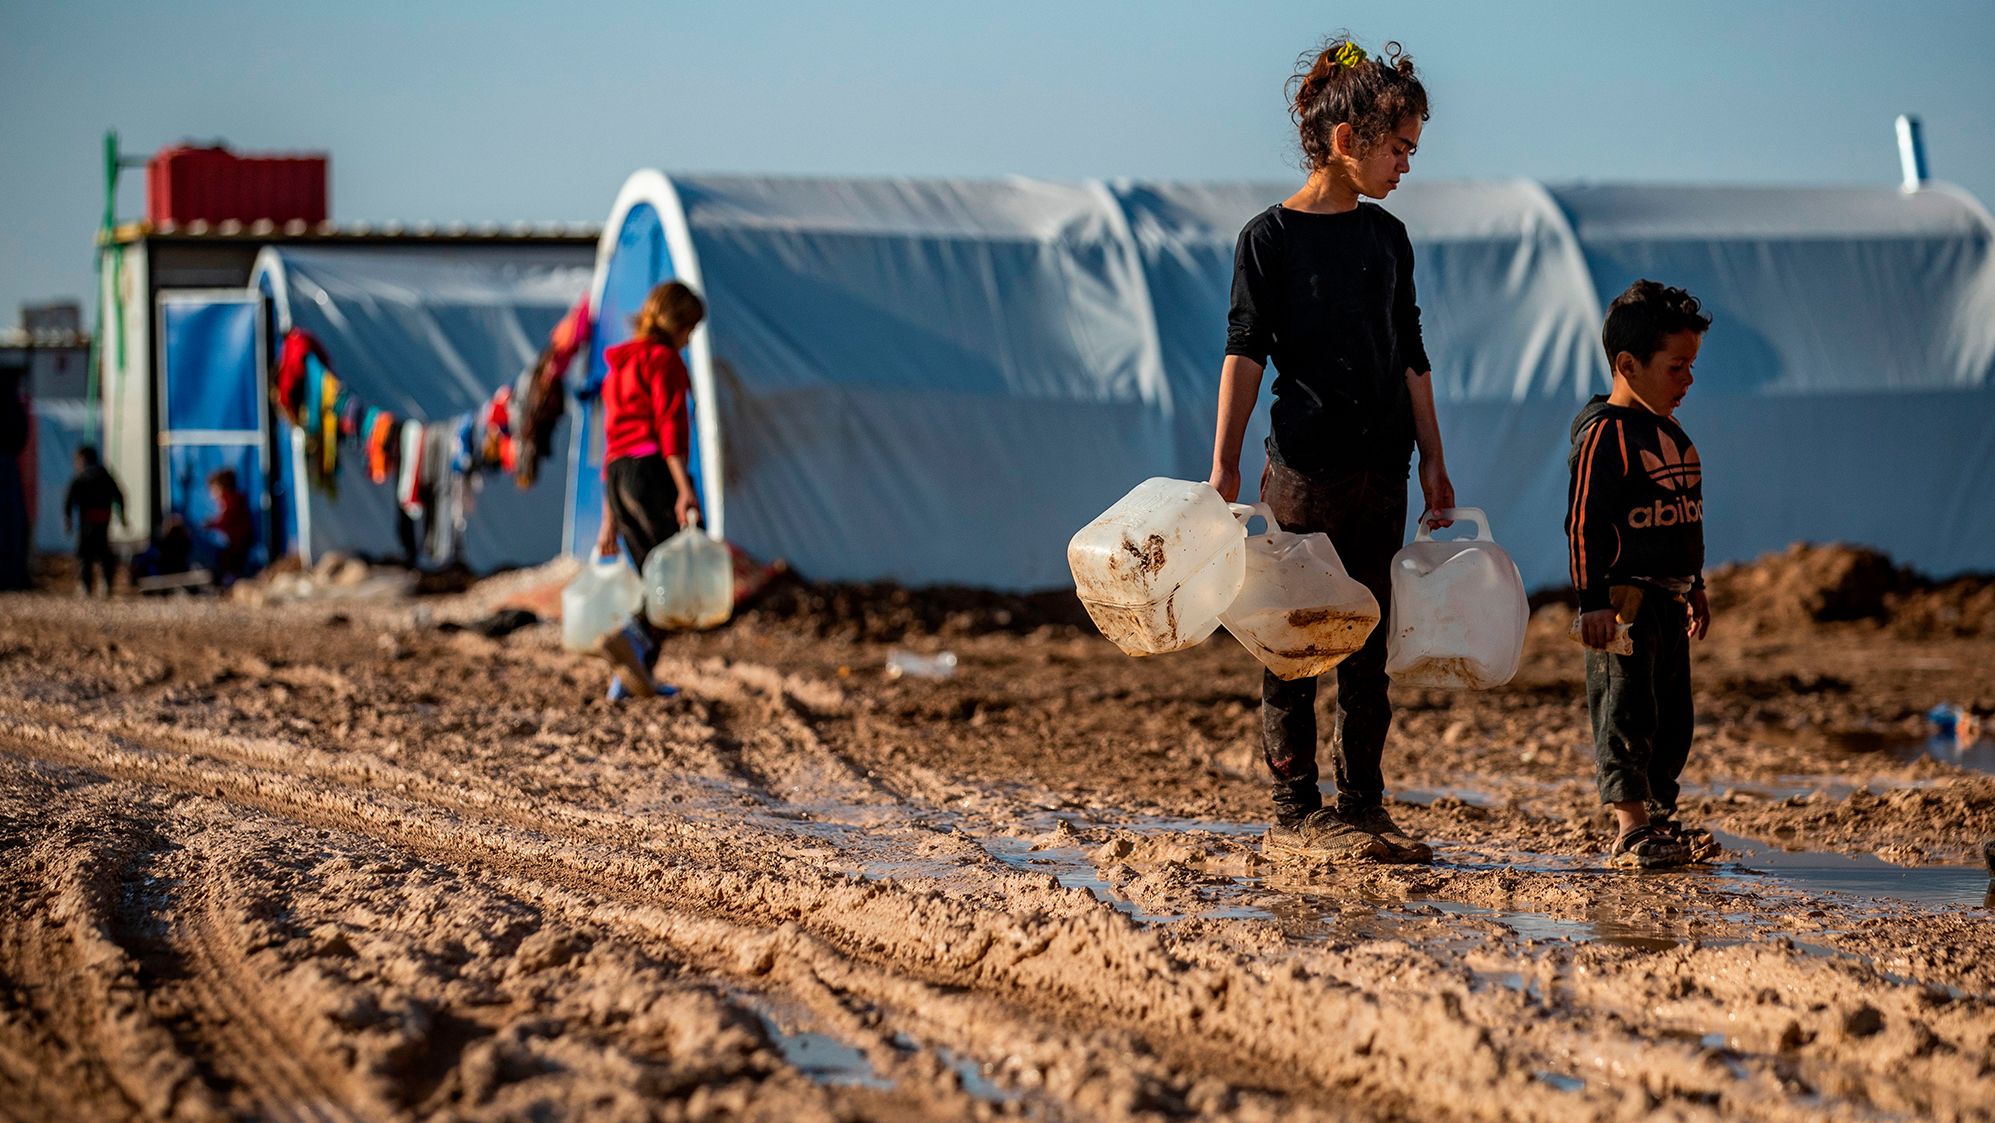 Children carry jugs to fill with water in the Washukanni camp for internally displaced people in northeastern Syria.